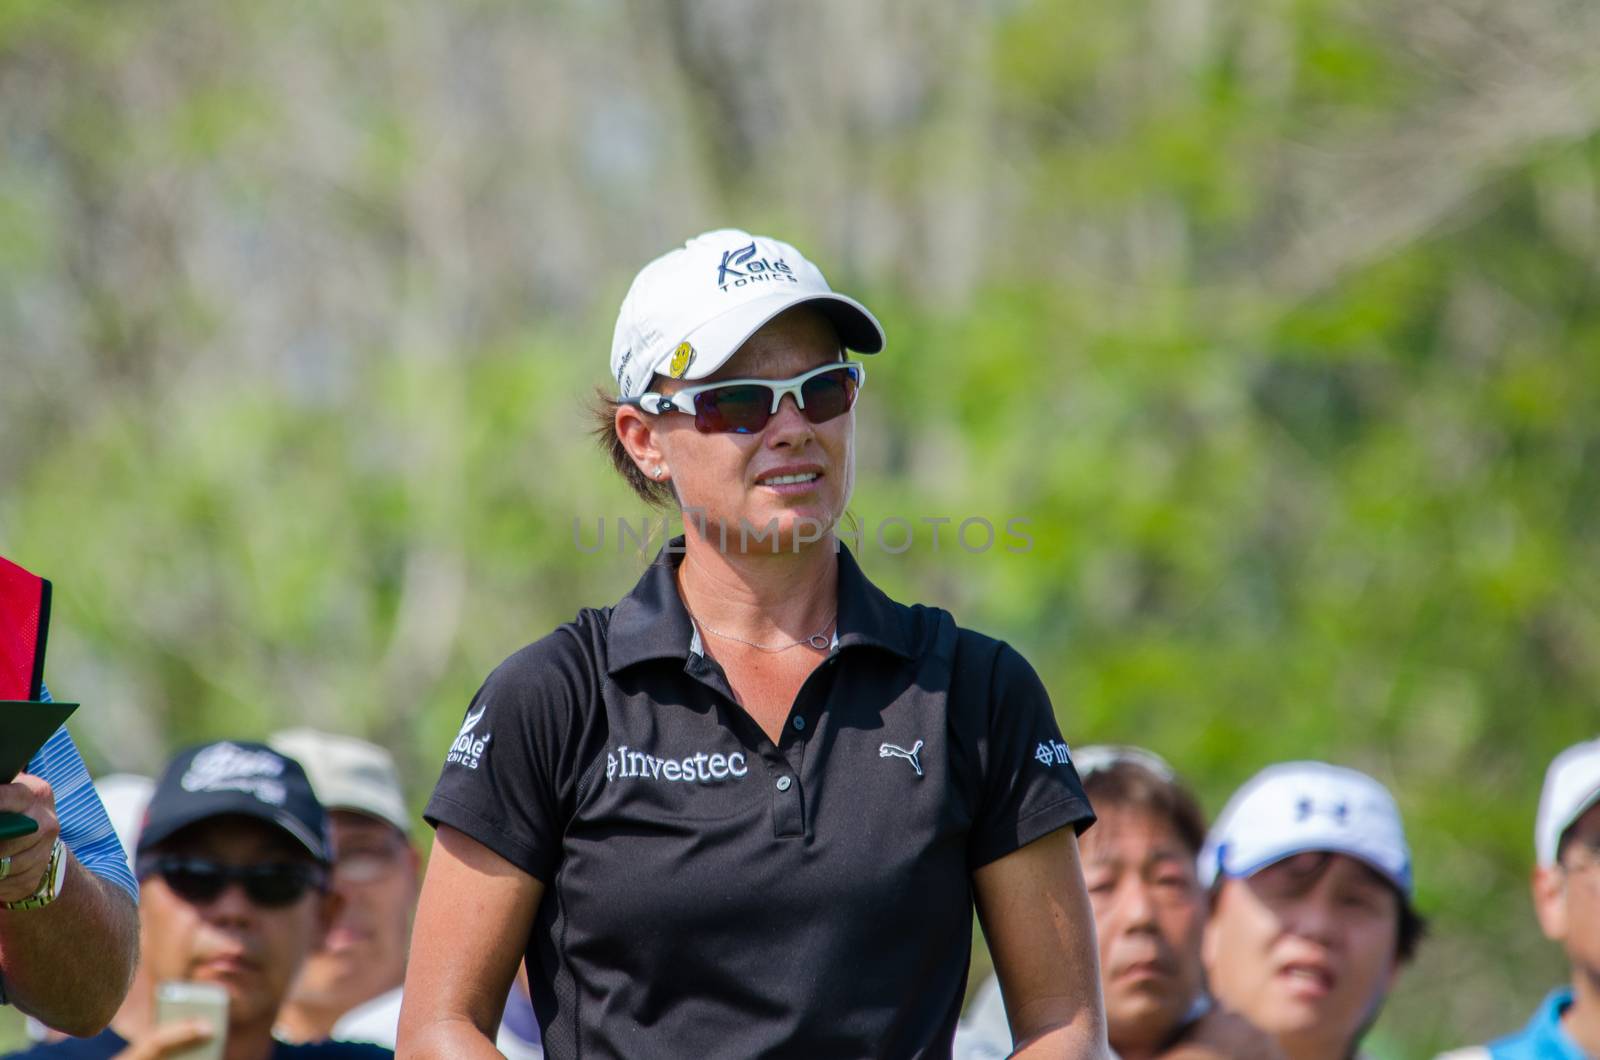 CHONBURI - FEBRUARY 28 : Lee-Anne Pace of South Africa in Honda LPGA Thailand 2016 at Siam Country Club, Pattaya Old Course on February 28, 2016 in Chonburi, Thailand.